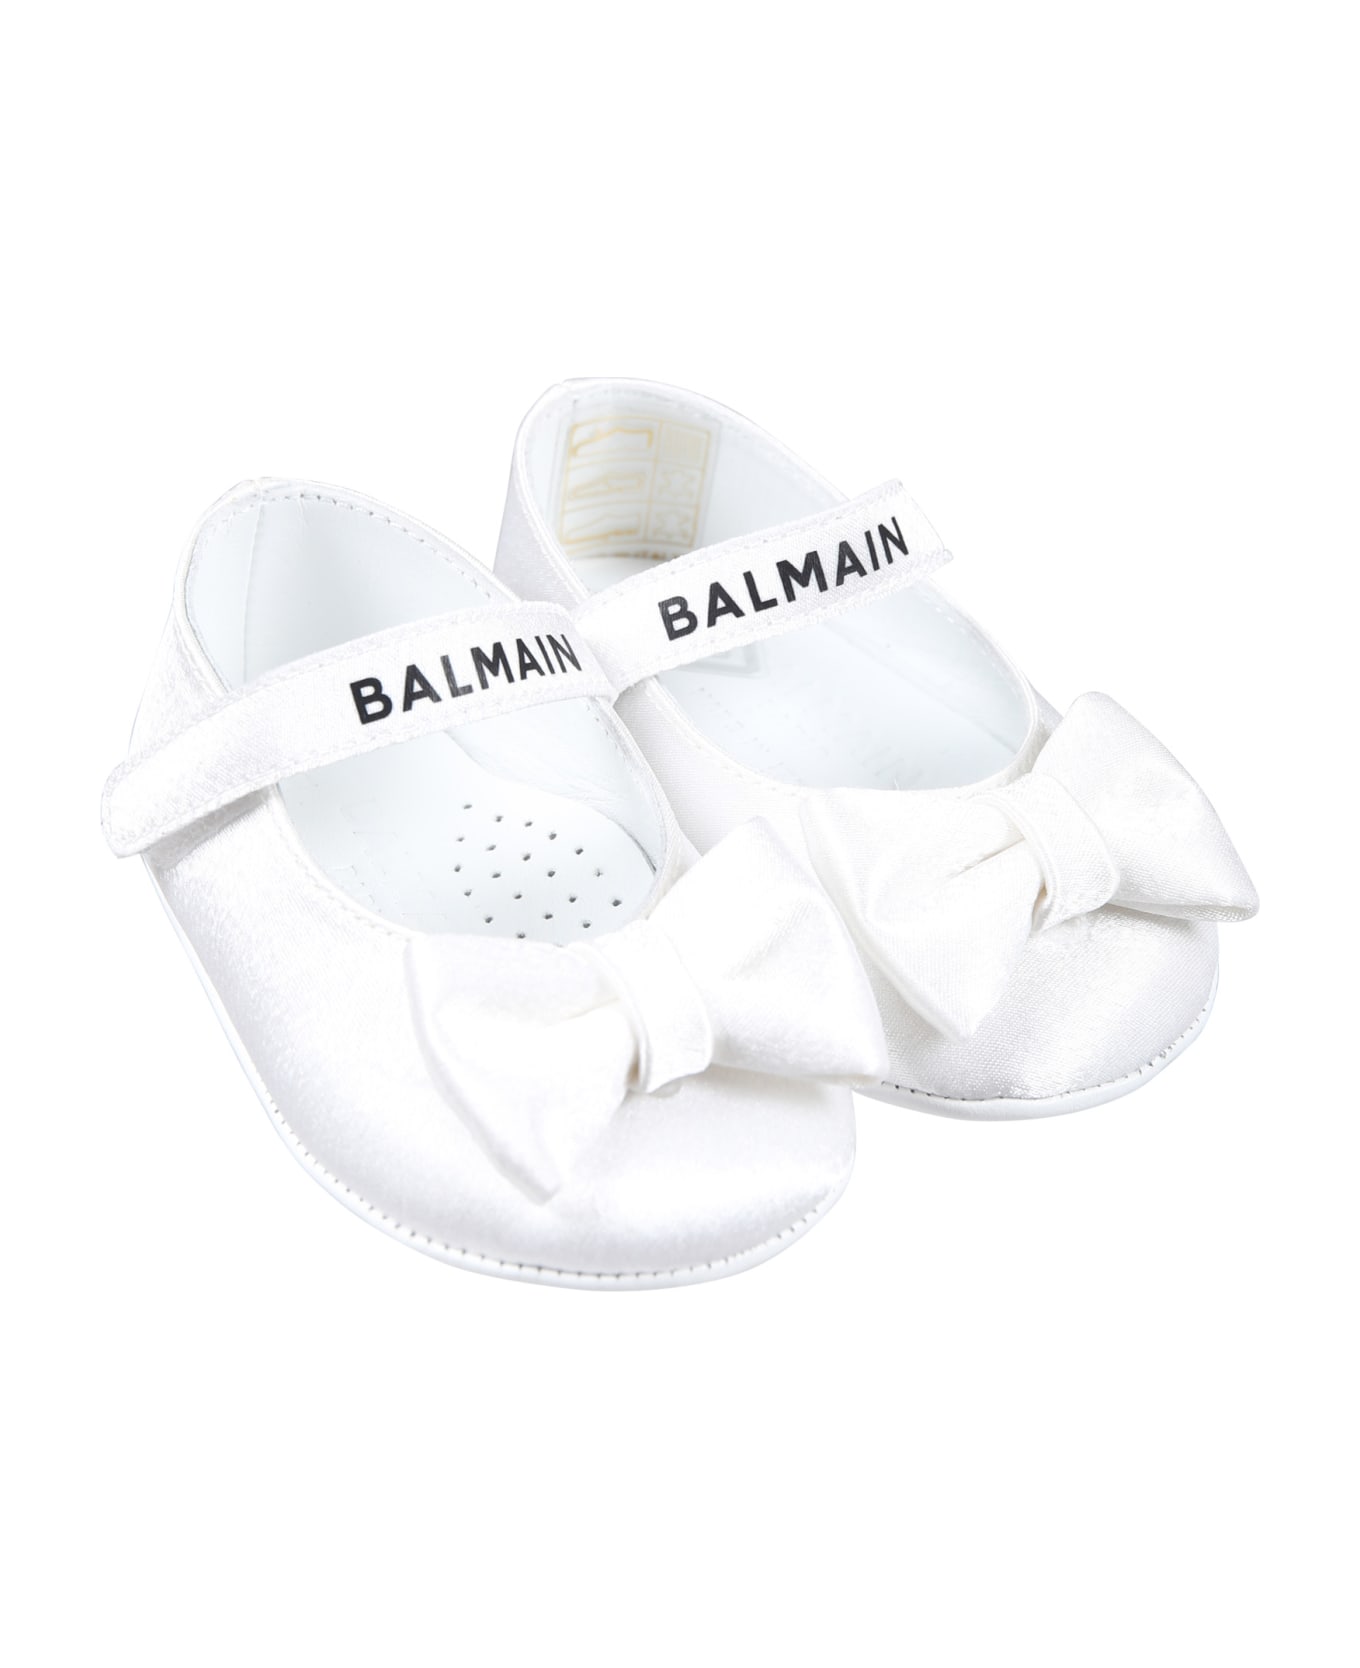 Balmain White Shoes For Baby Girl With Logo And Bow - White シューズ